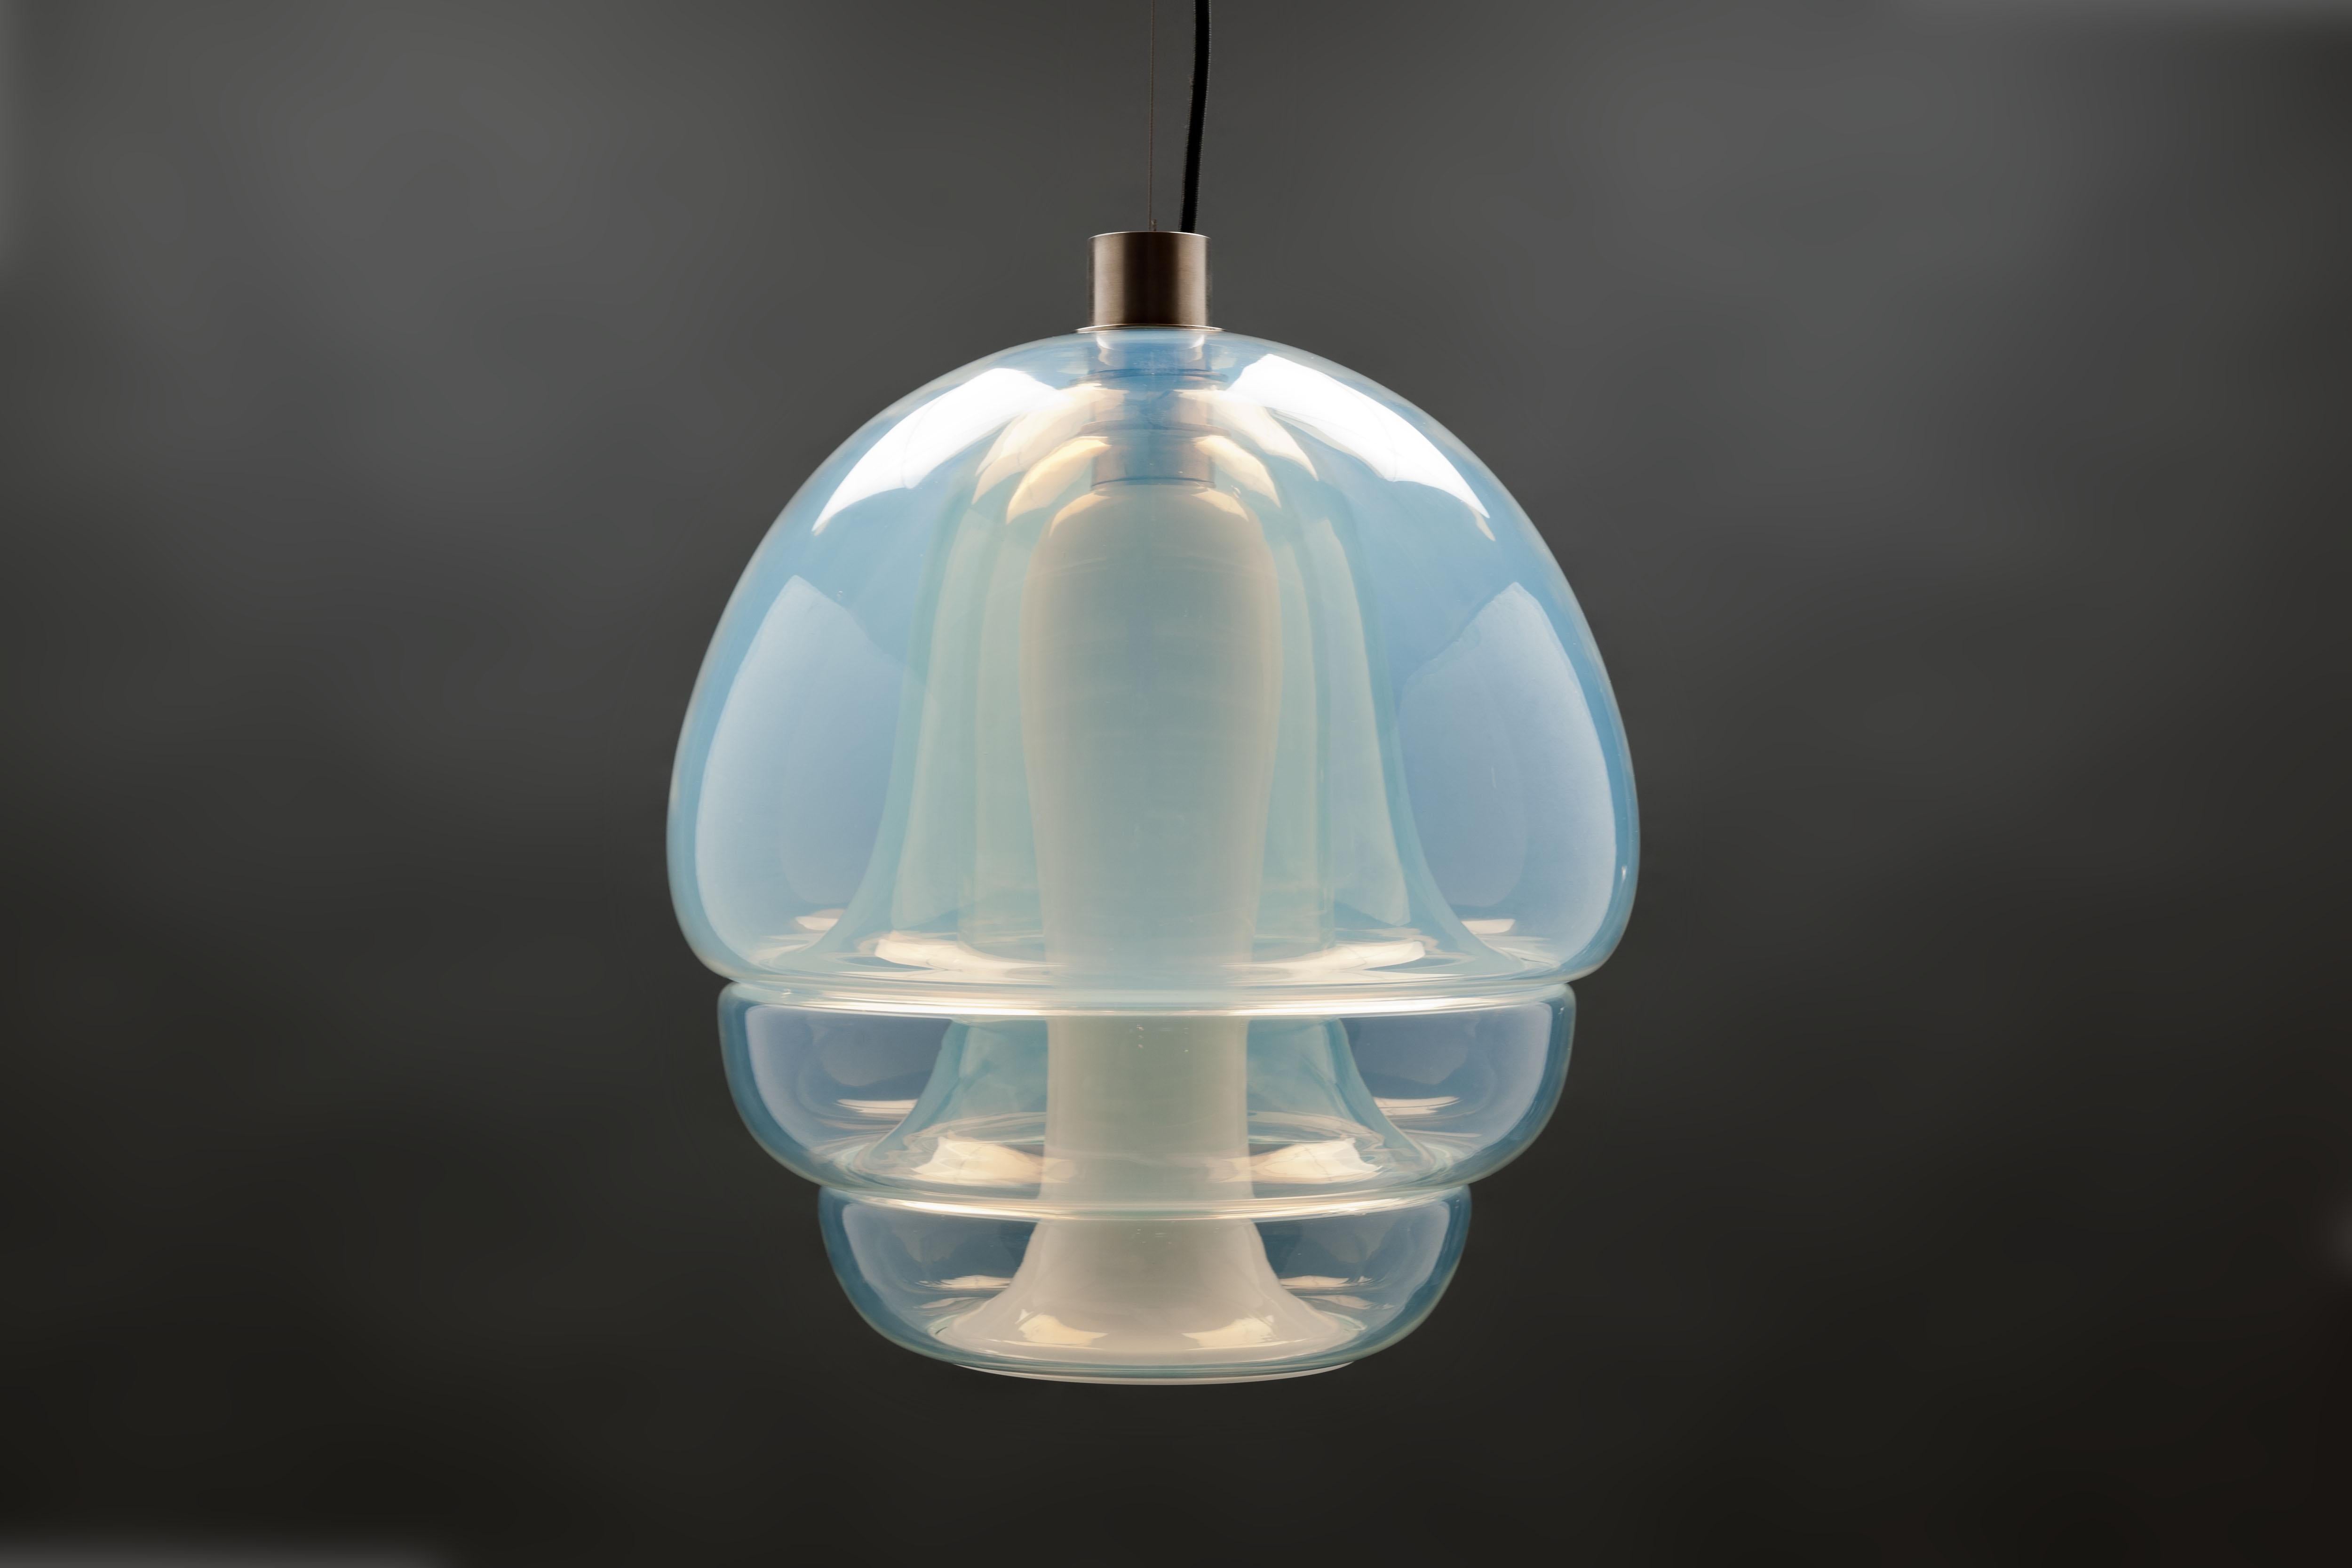 Pendant model LS 134 by Italian designer Carlo Nason, designed in 1969 and executed by Mazzega Murano, Italy. Pendant consisting of four interlocking opalescent mouth blown glass parts. 
This is a rare and spectacular enchanting light fixture that